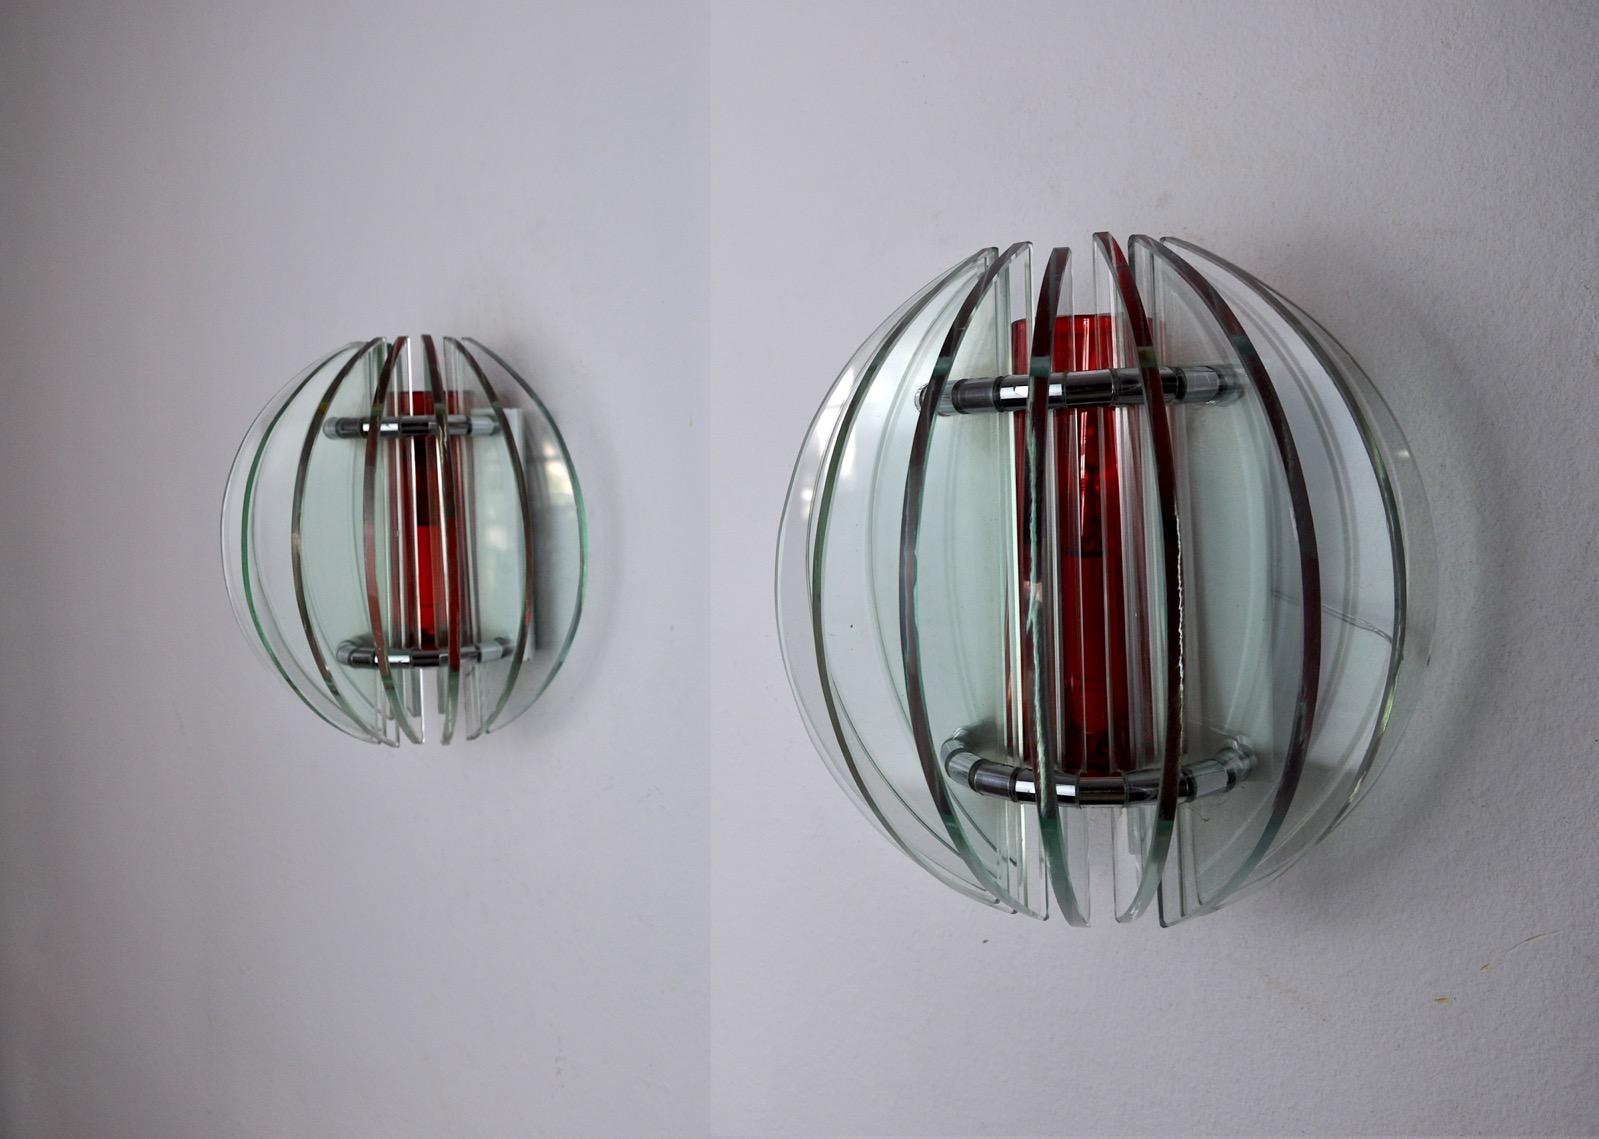 Very nice pair of veca sconces produced in italy in the 70s. Sconces composed of two-tone murano glass crystals, from which the central red crystal can be removed. White metal structure. Unique object that will illuminate wonderfully and bring a